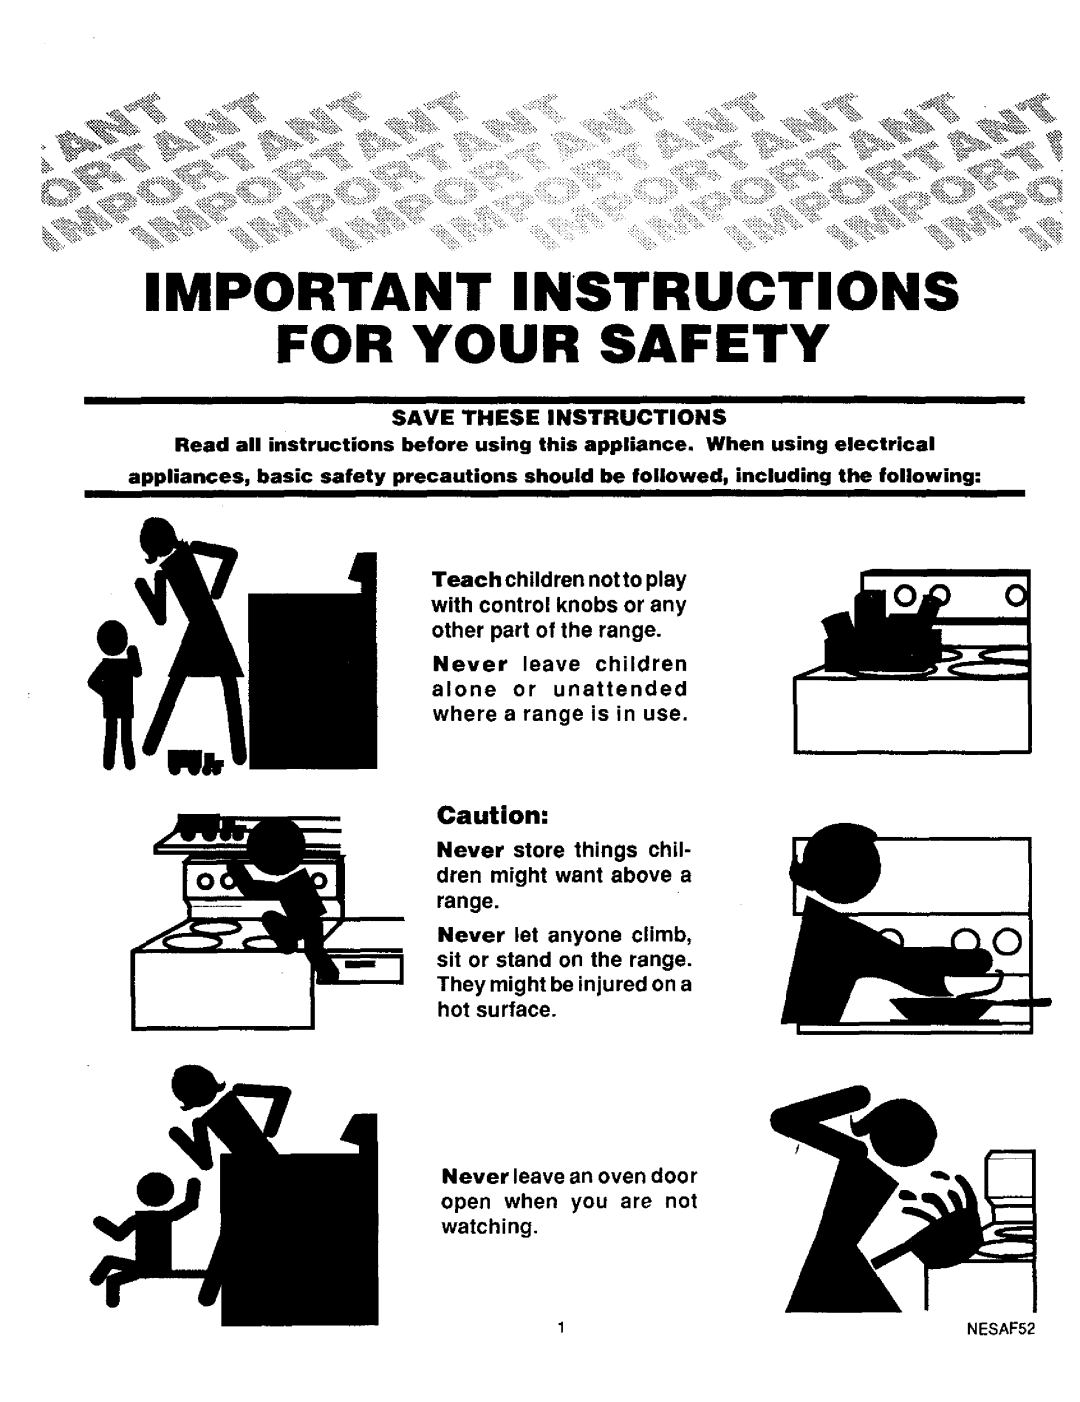 Sears 45521, 45520 warranty Important Instructions For Your Safety, iiiiiiiiiiiiiiiiiiiliil, if, iiiii!!!!ii ill 